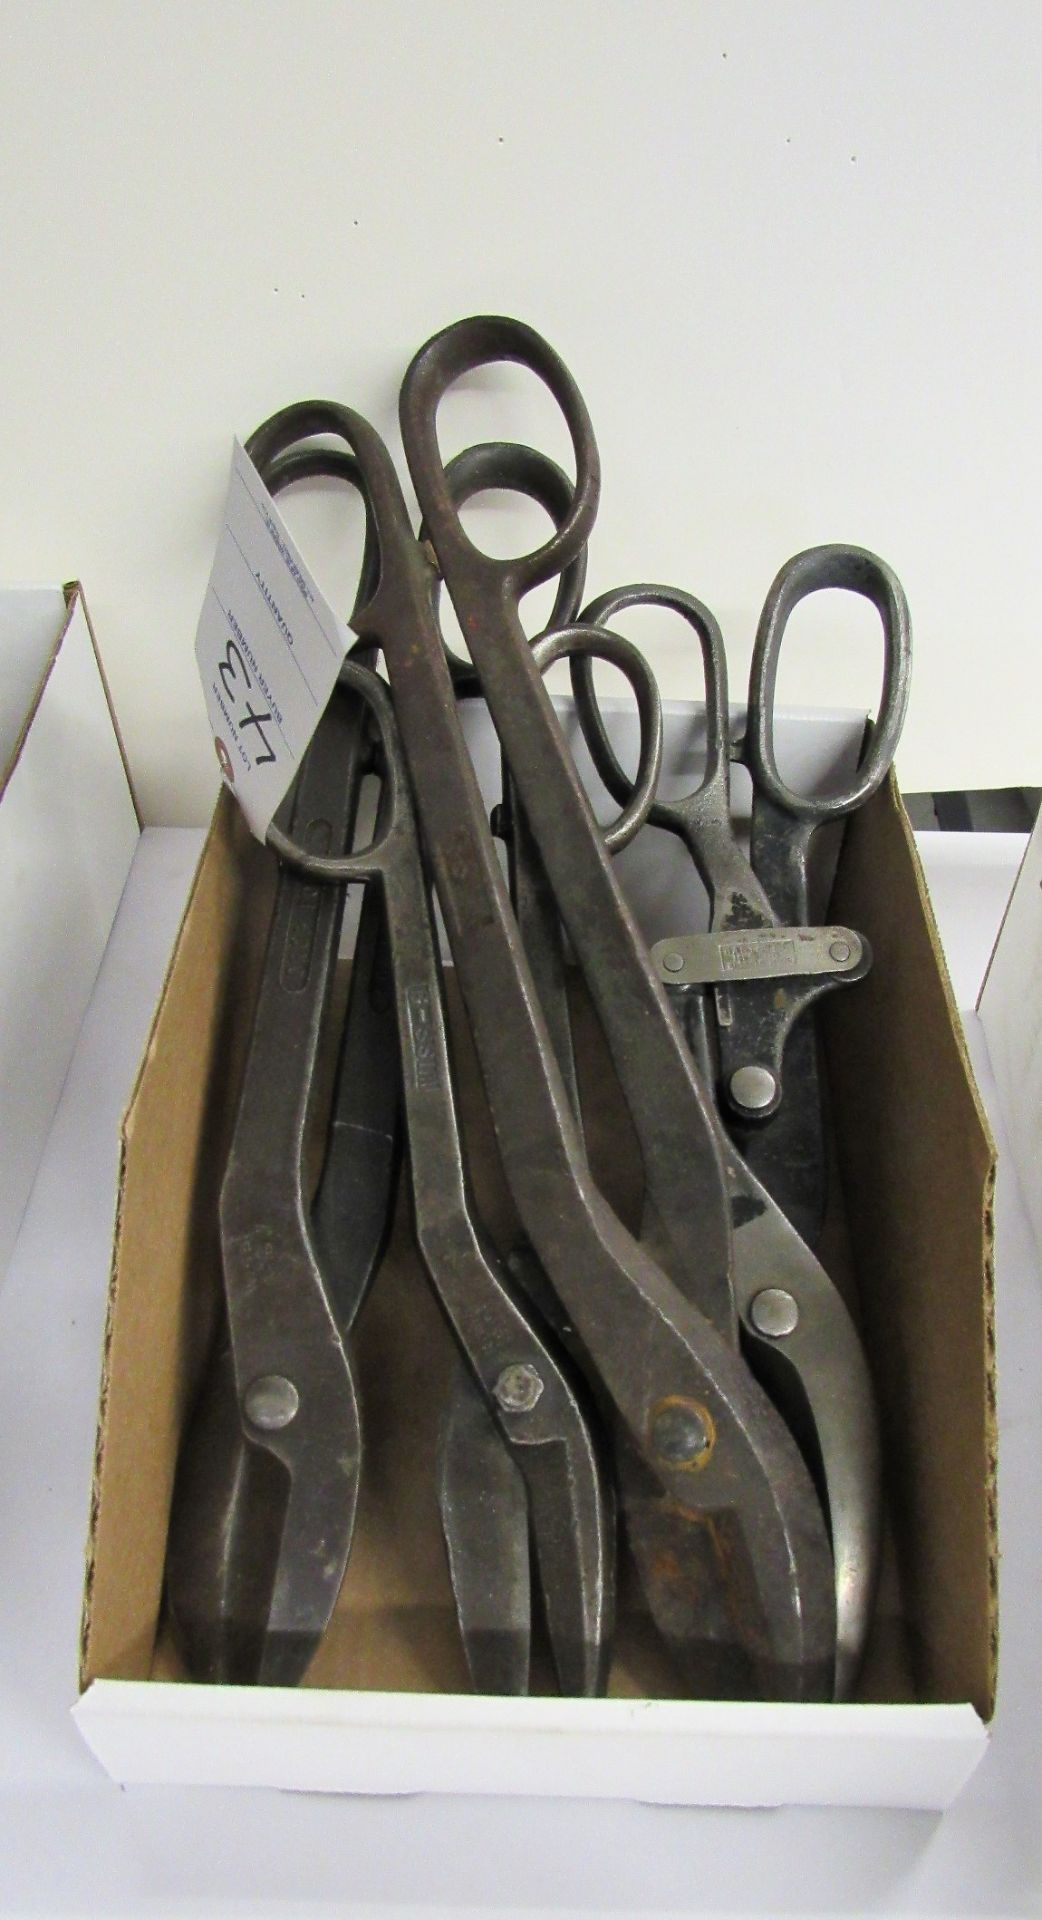 (4) Wiss Industrial Forged Steel Metal Hand Shears / Tin Snips